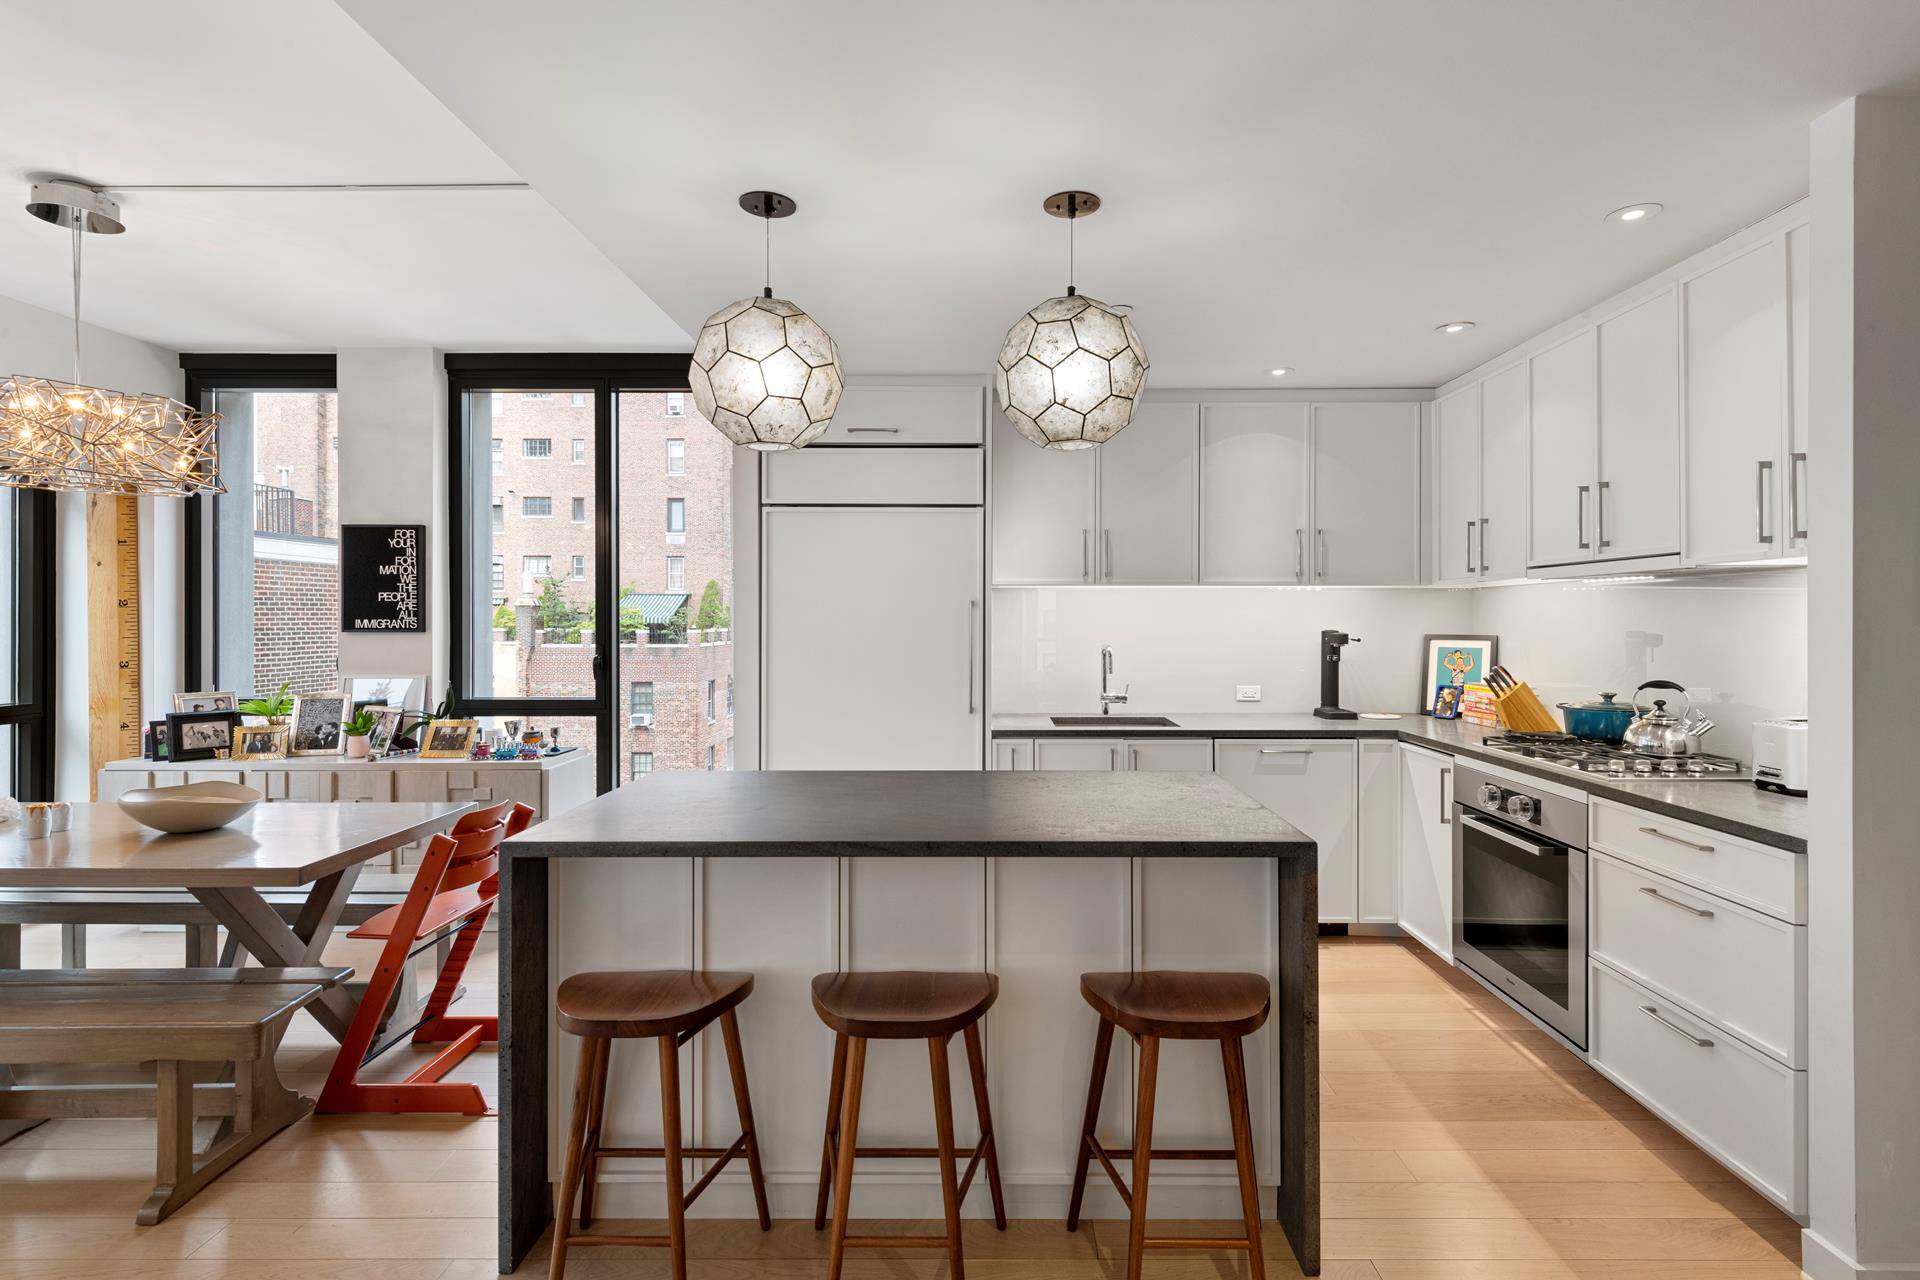 Graced with sublime finishes and an abundance of natural light, this 3 bedroom, 2 bathroom condo is a portrait of contemporary Gramercy Park luxury.